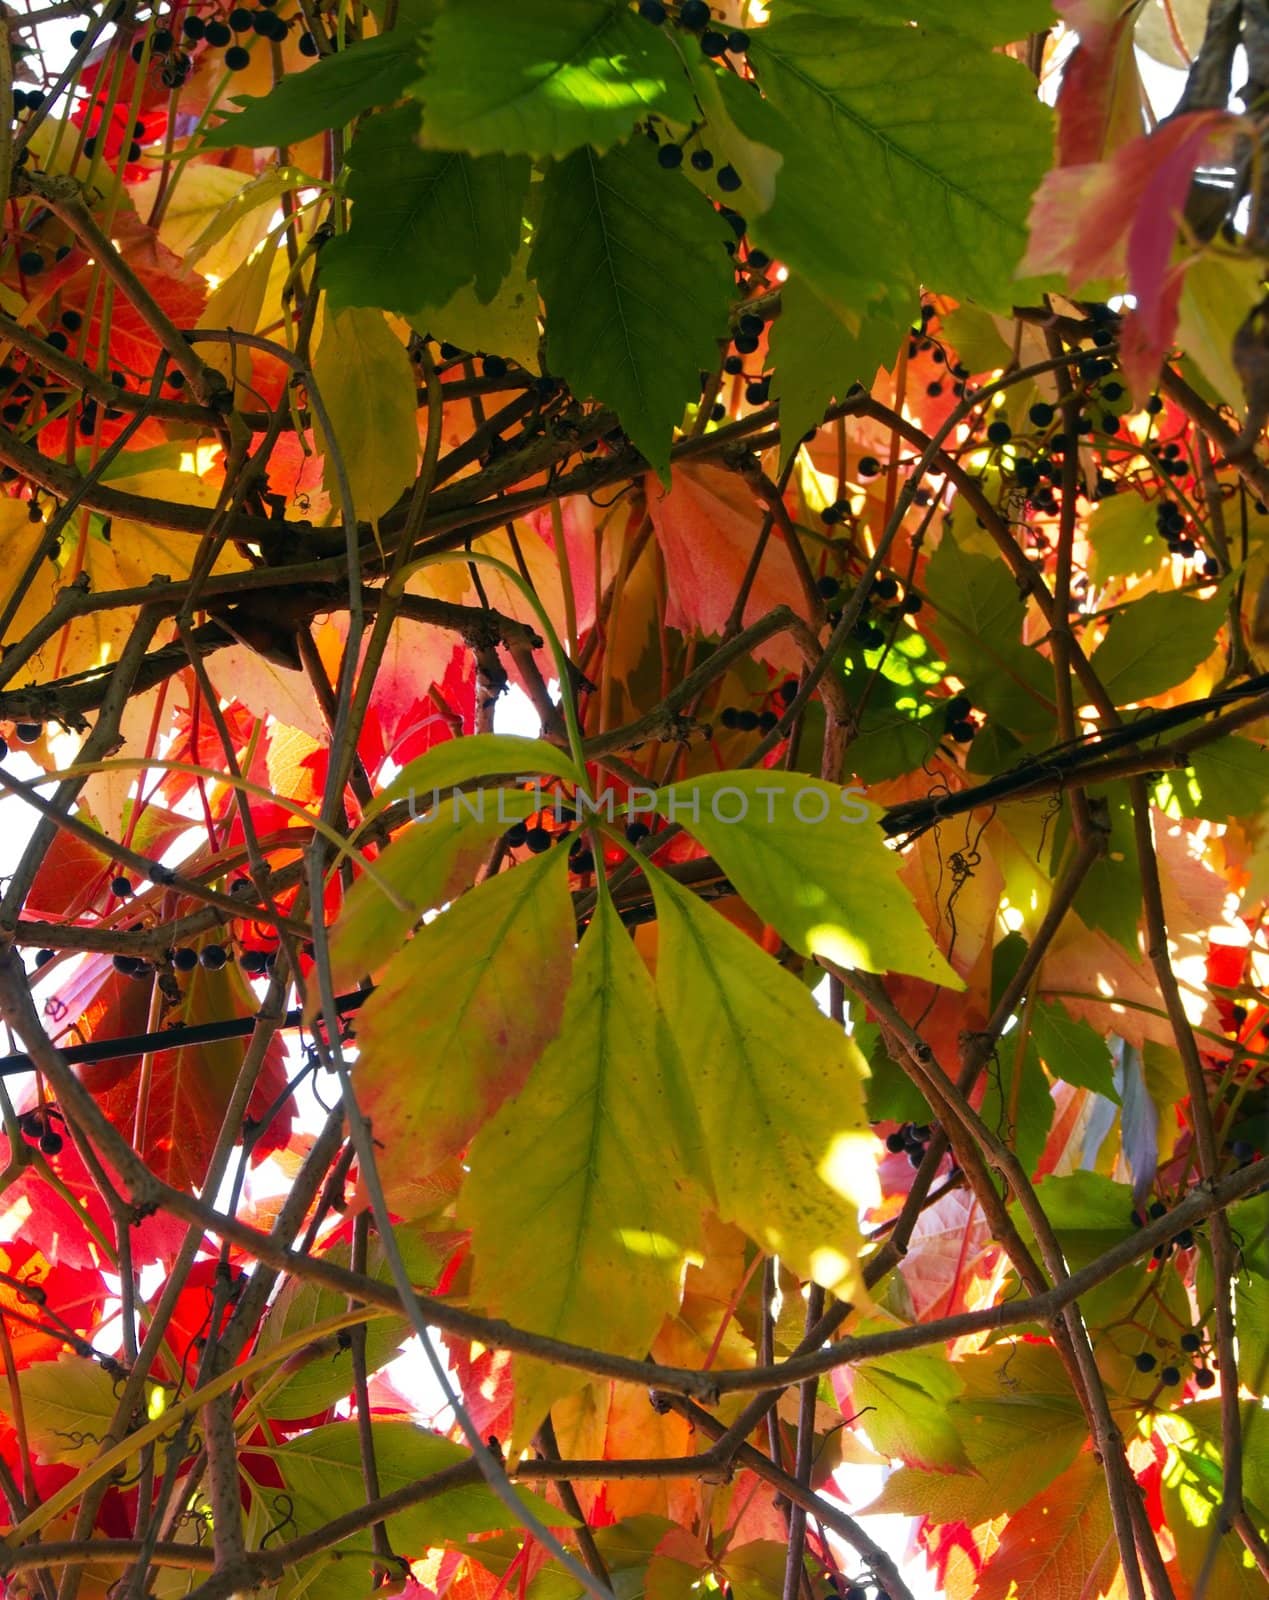 Leaves of wild grapes in October